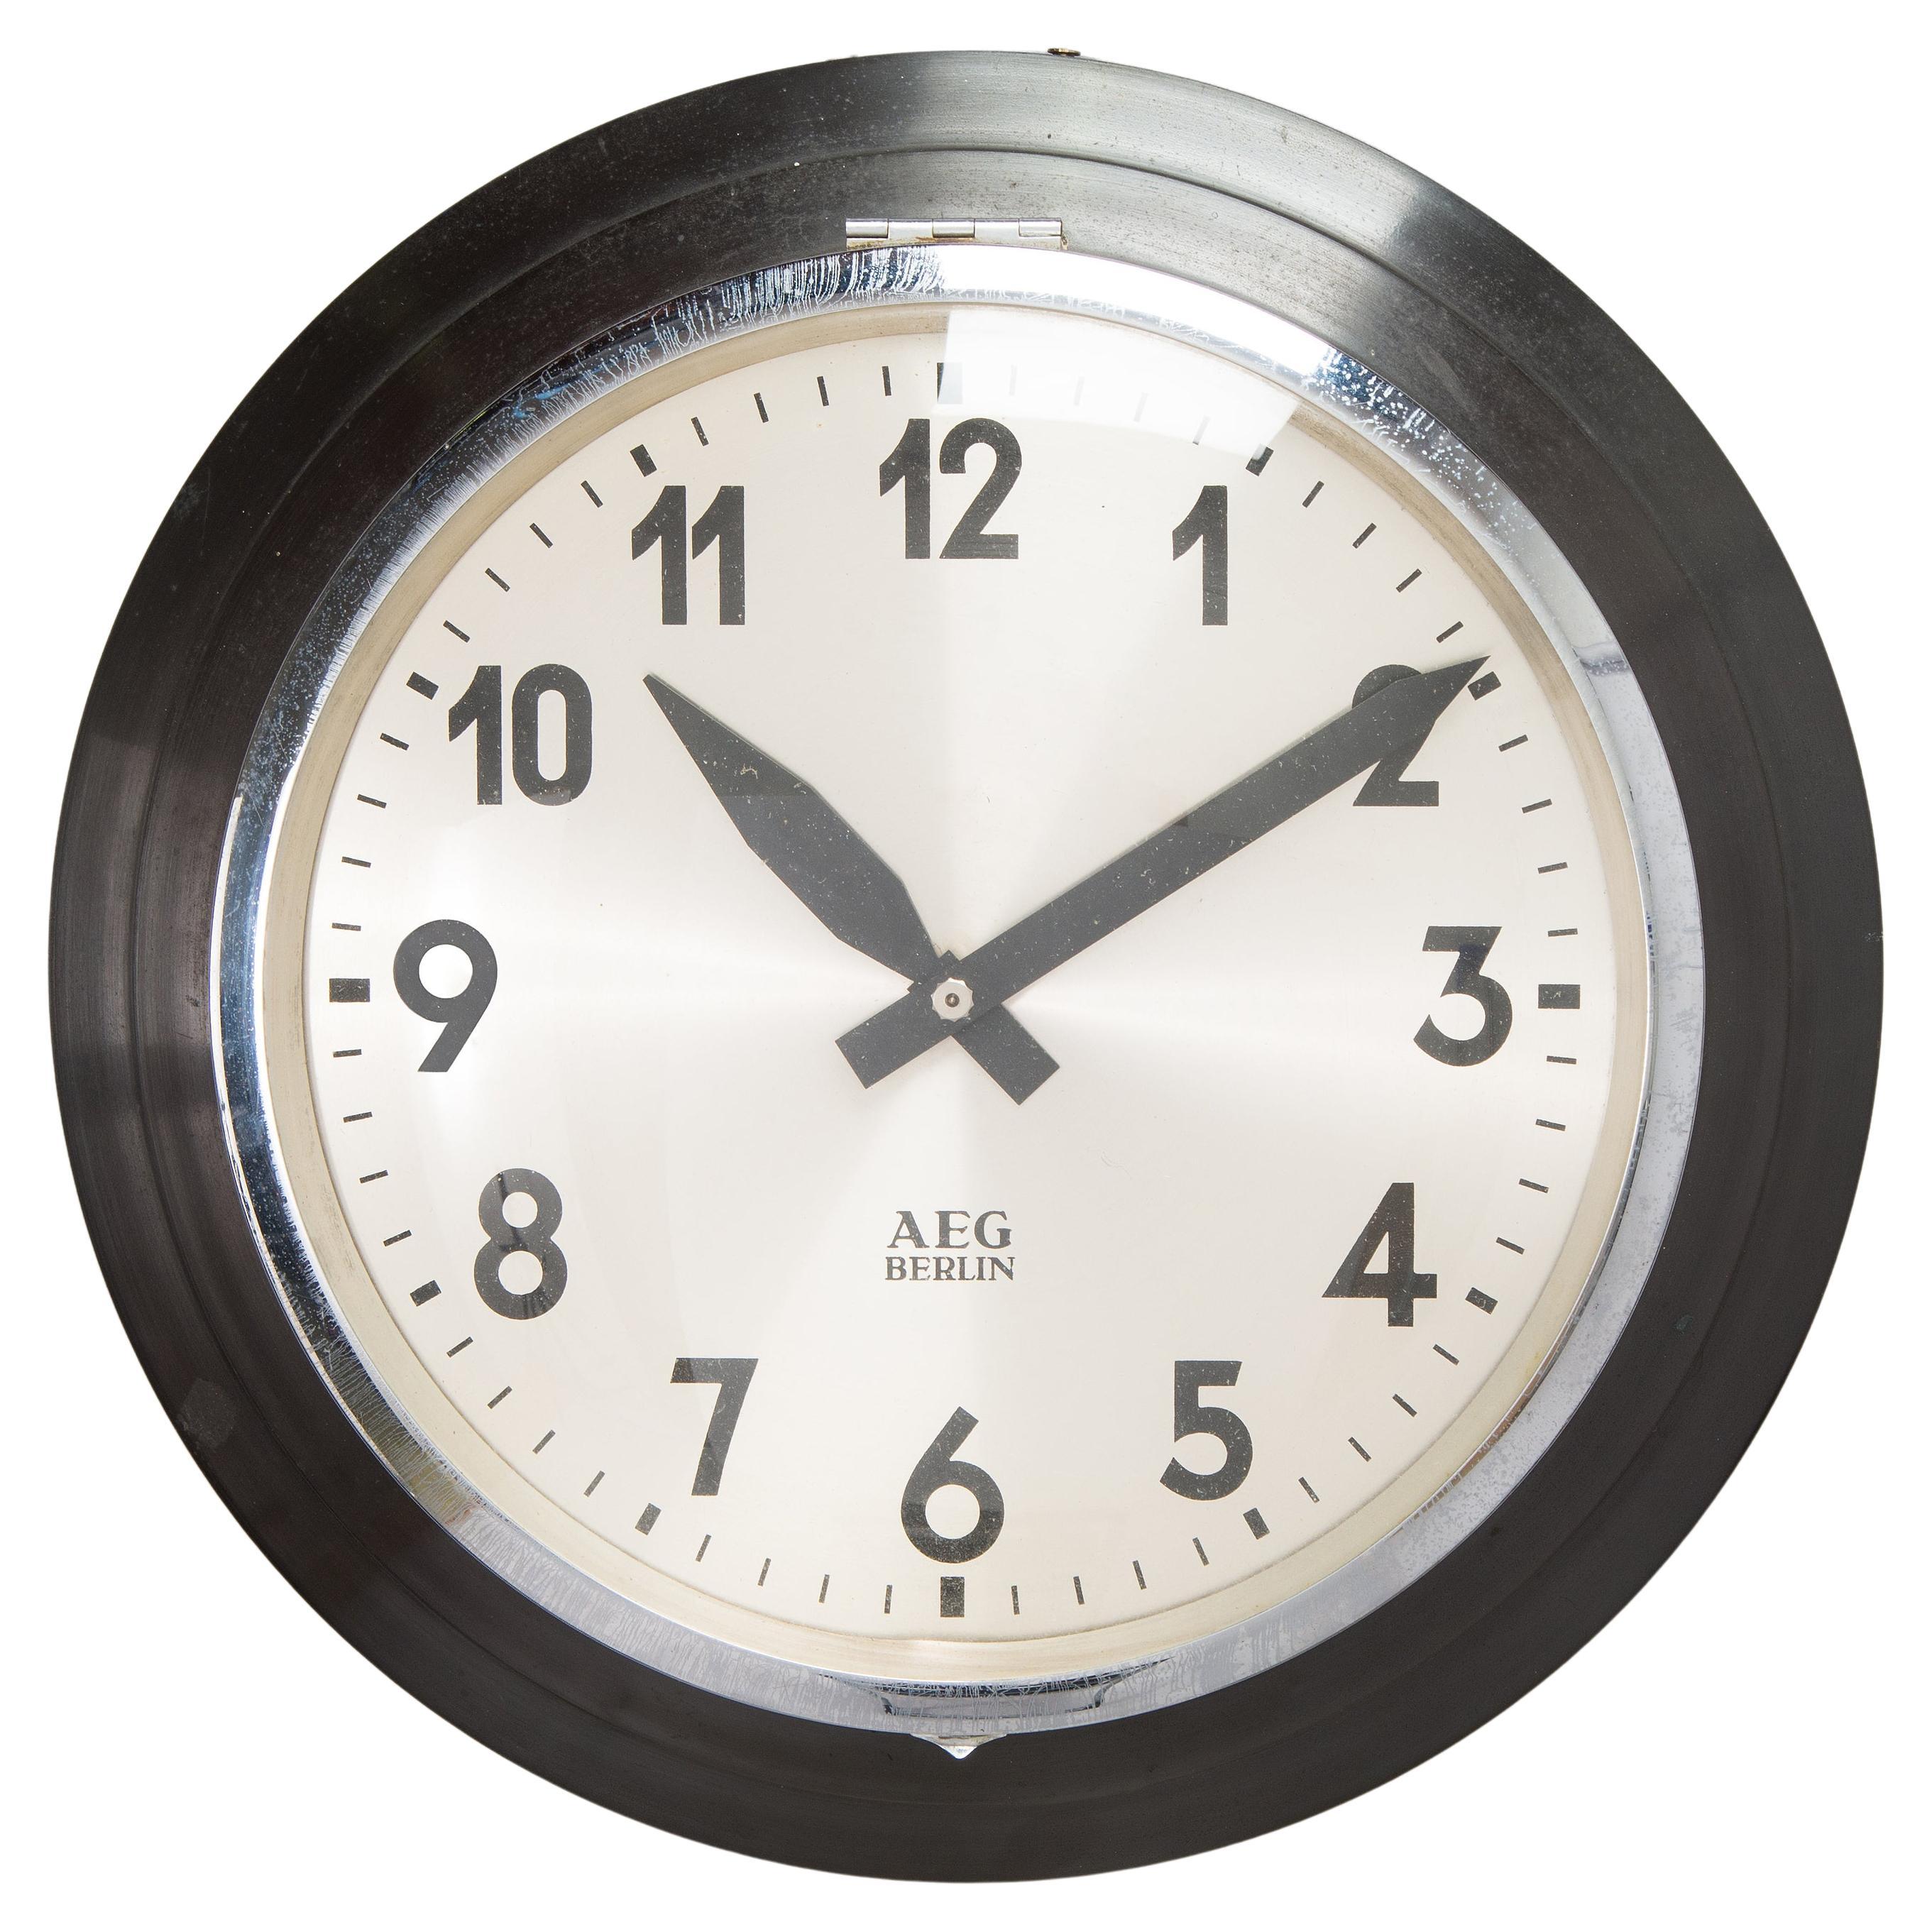 Which brand of wall clock is best?